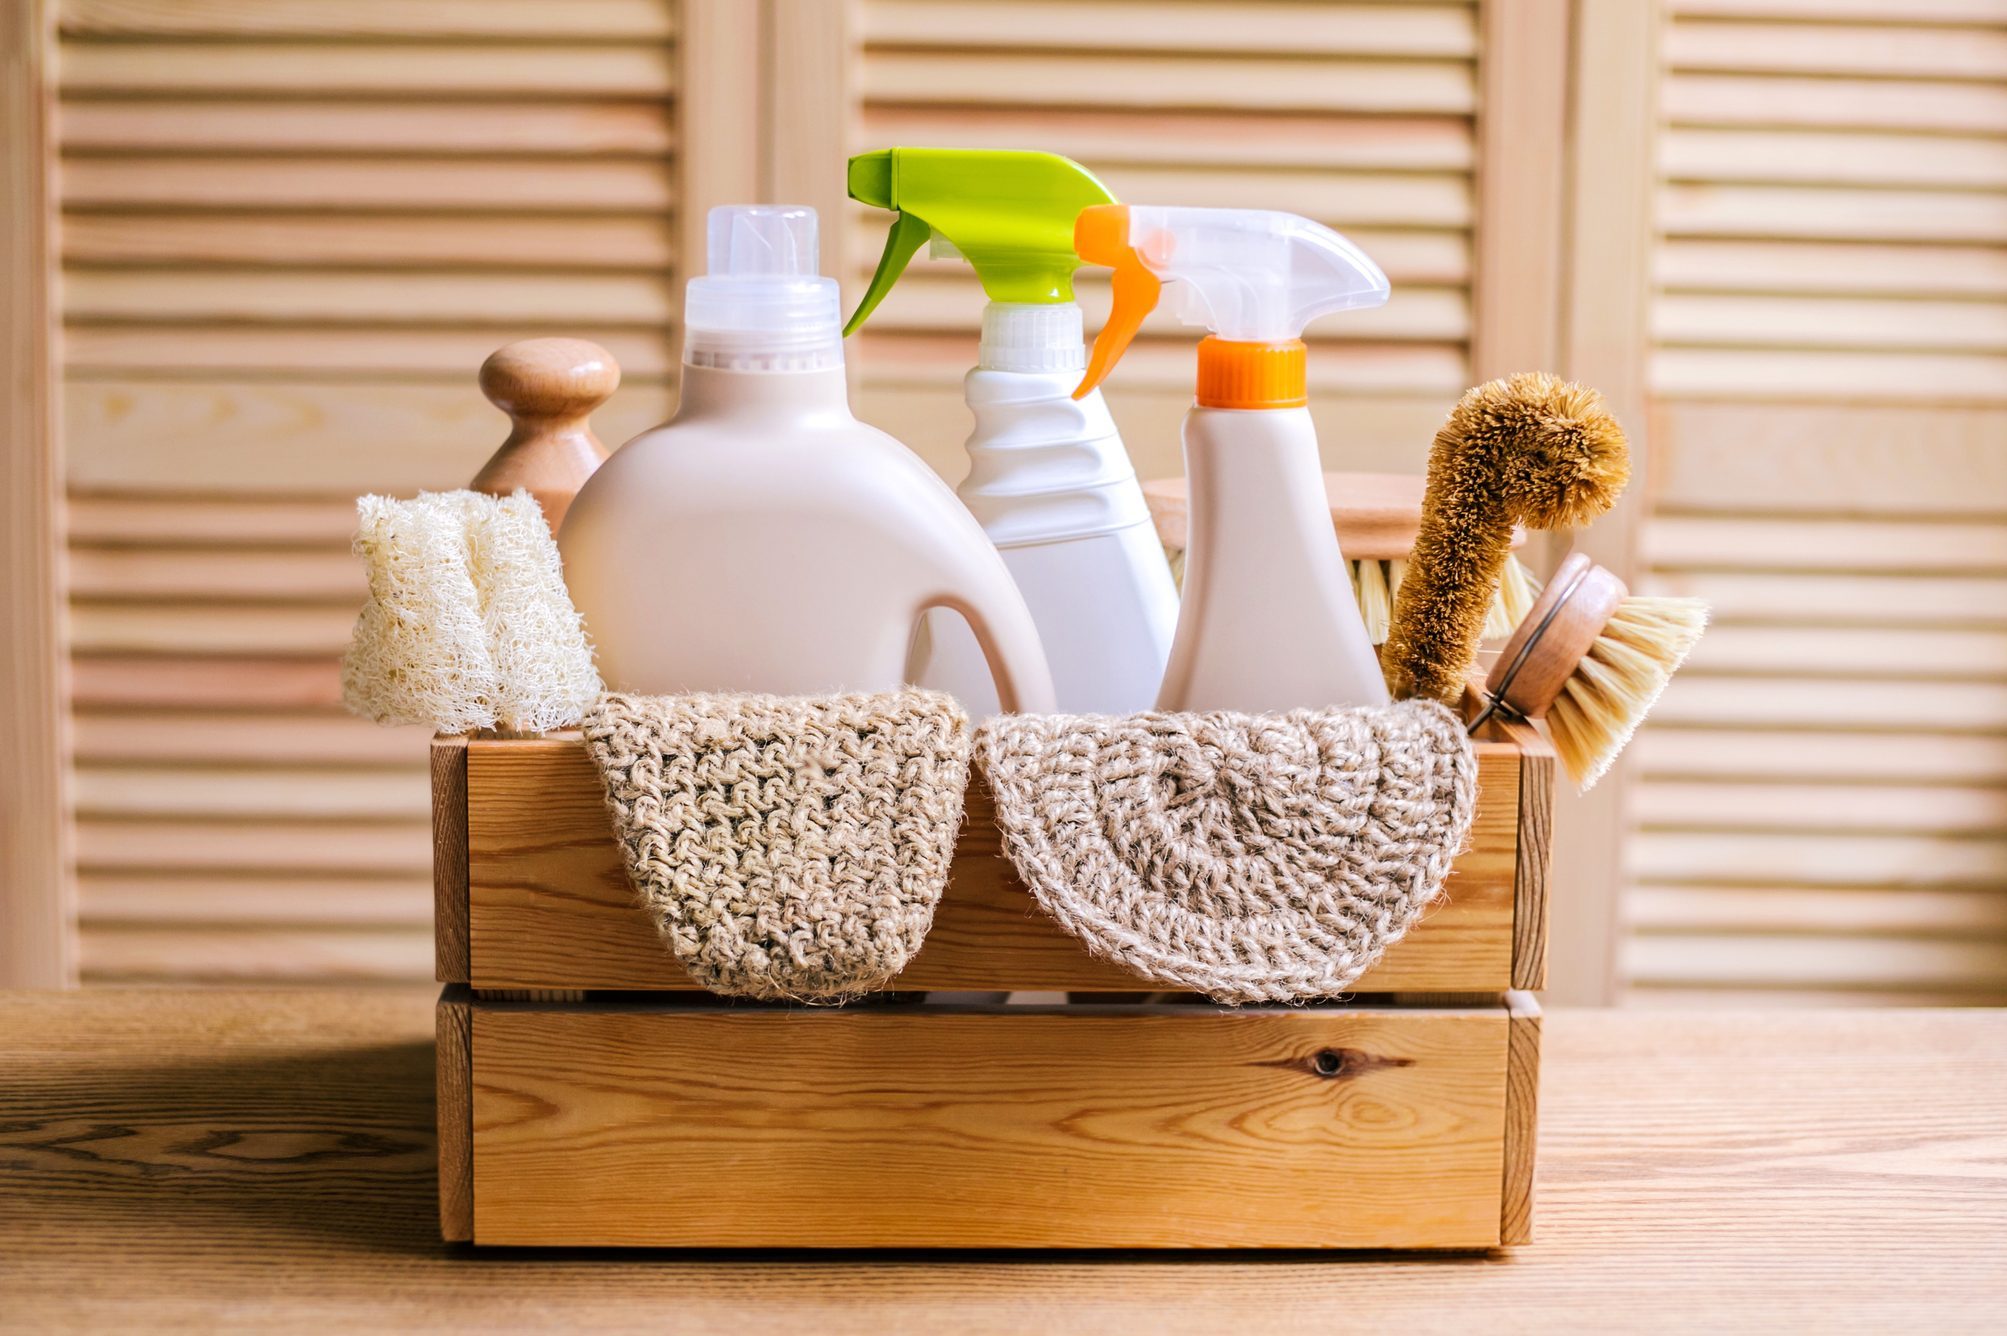 How to wash dishes sustainably and 17 useful products